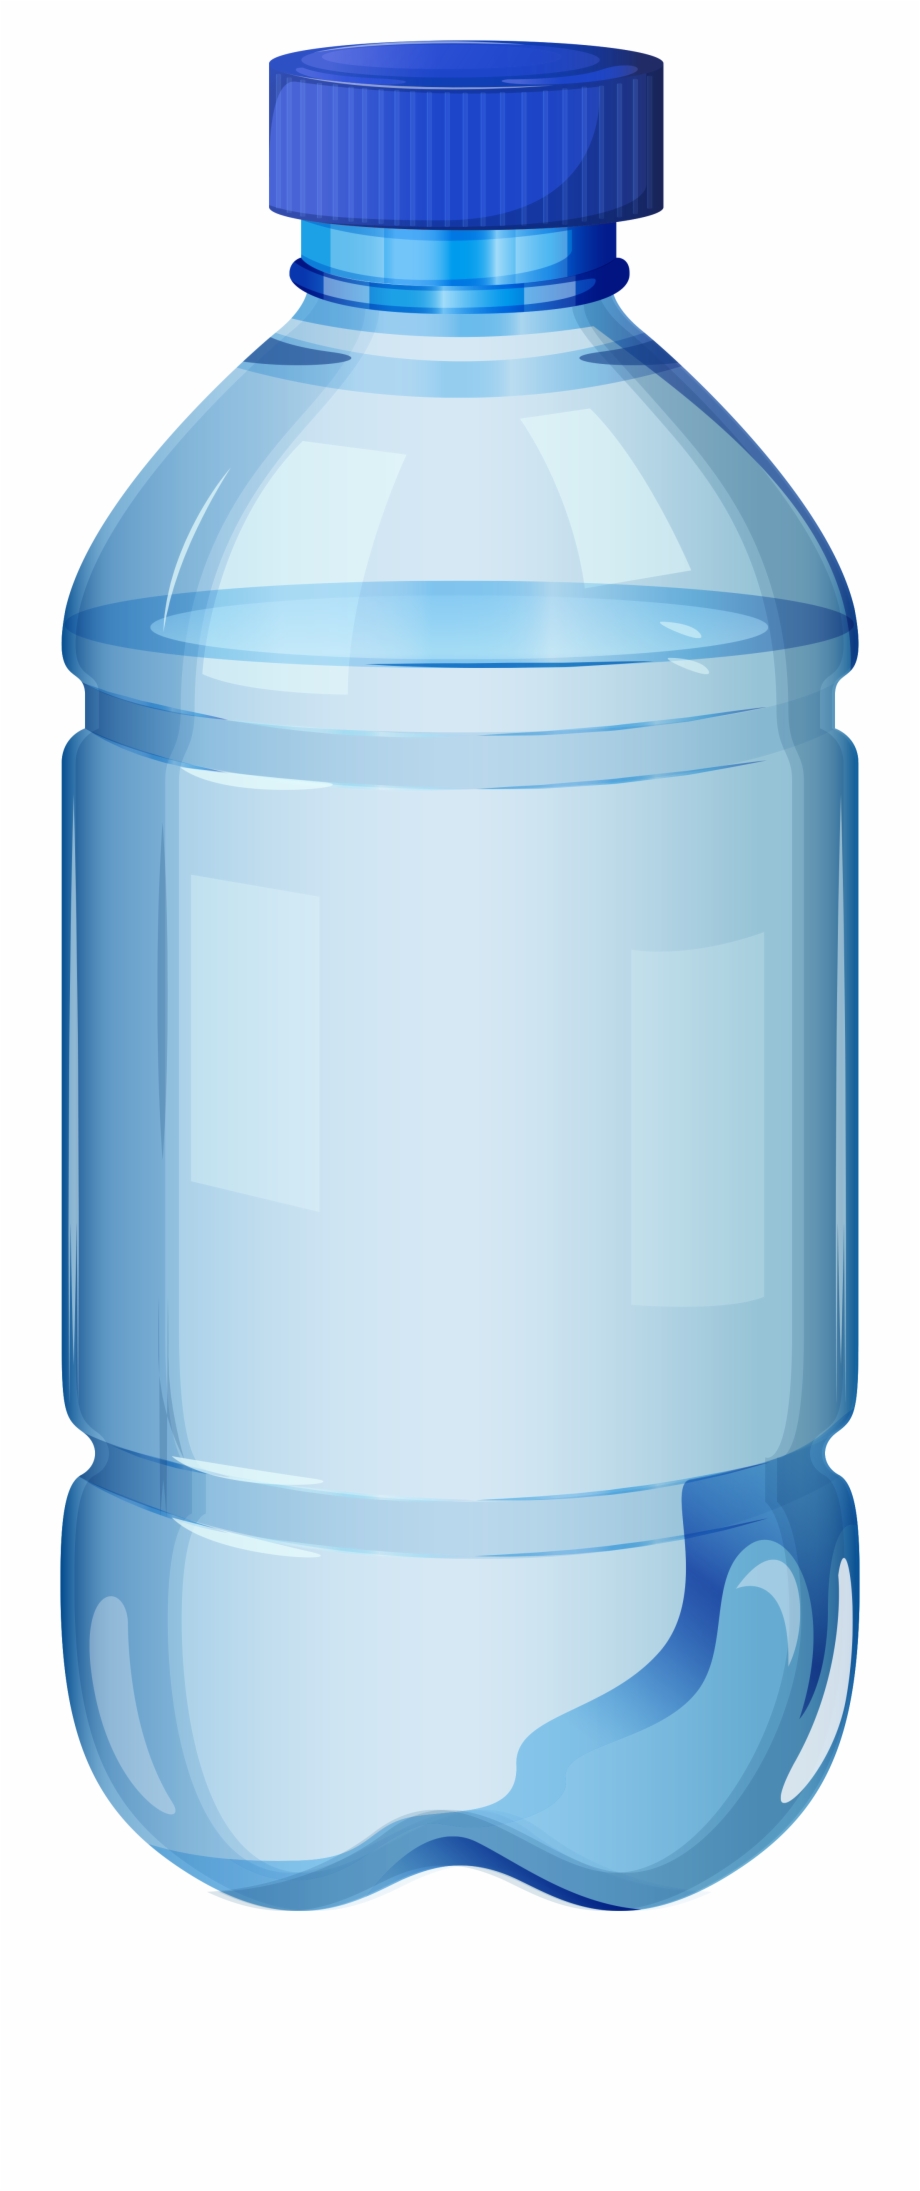 Water Bottle Png Image Water Bottle Clipart